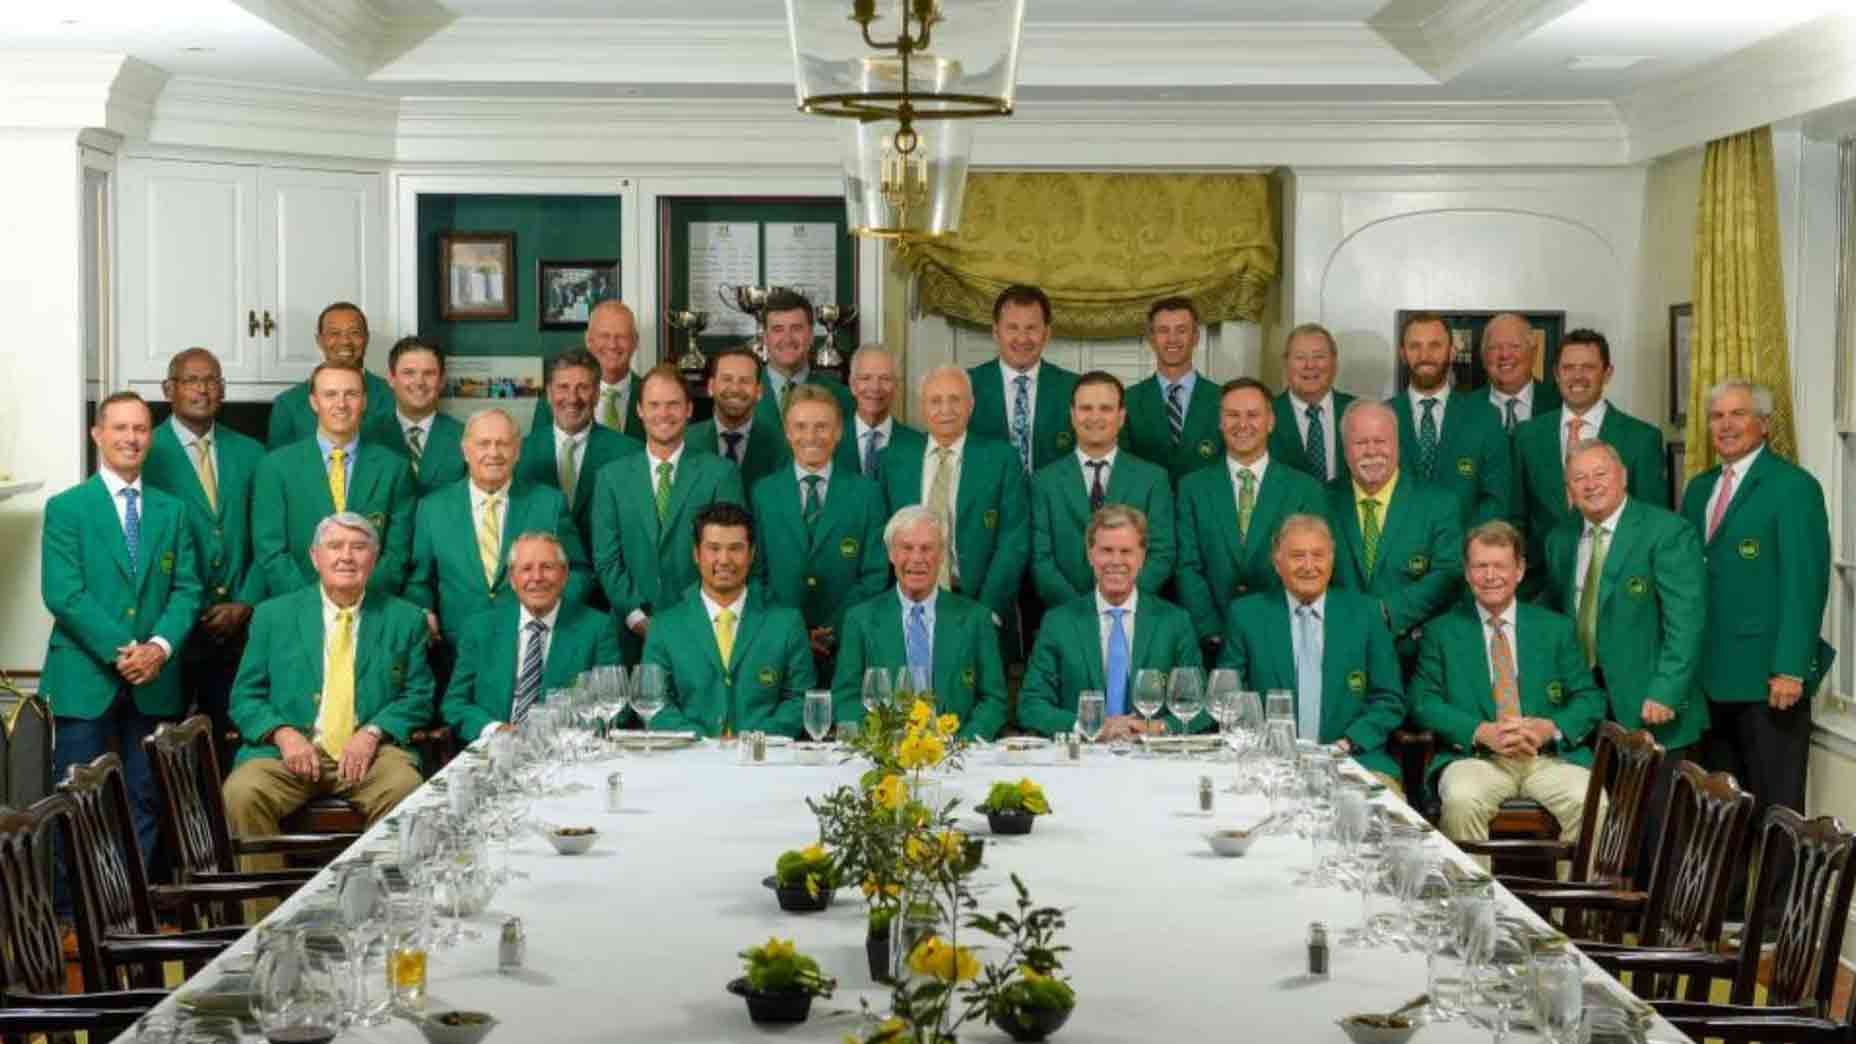 LIV tension at Masters Champions Dinner? Tiger Woods weighs in